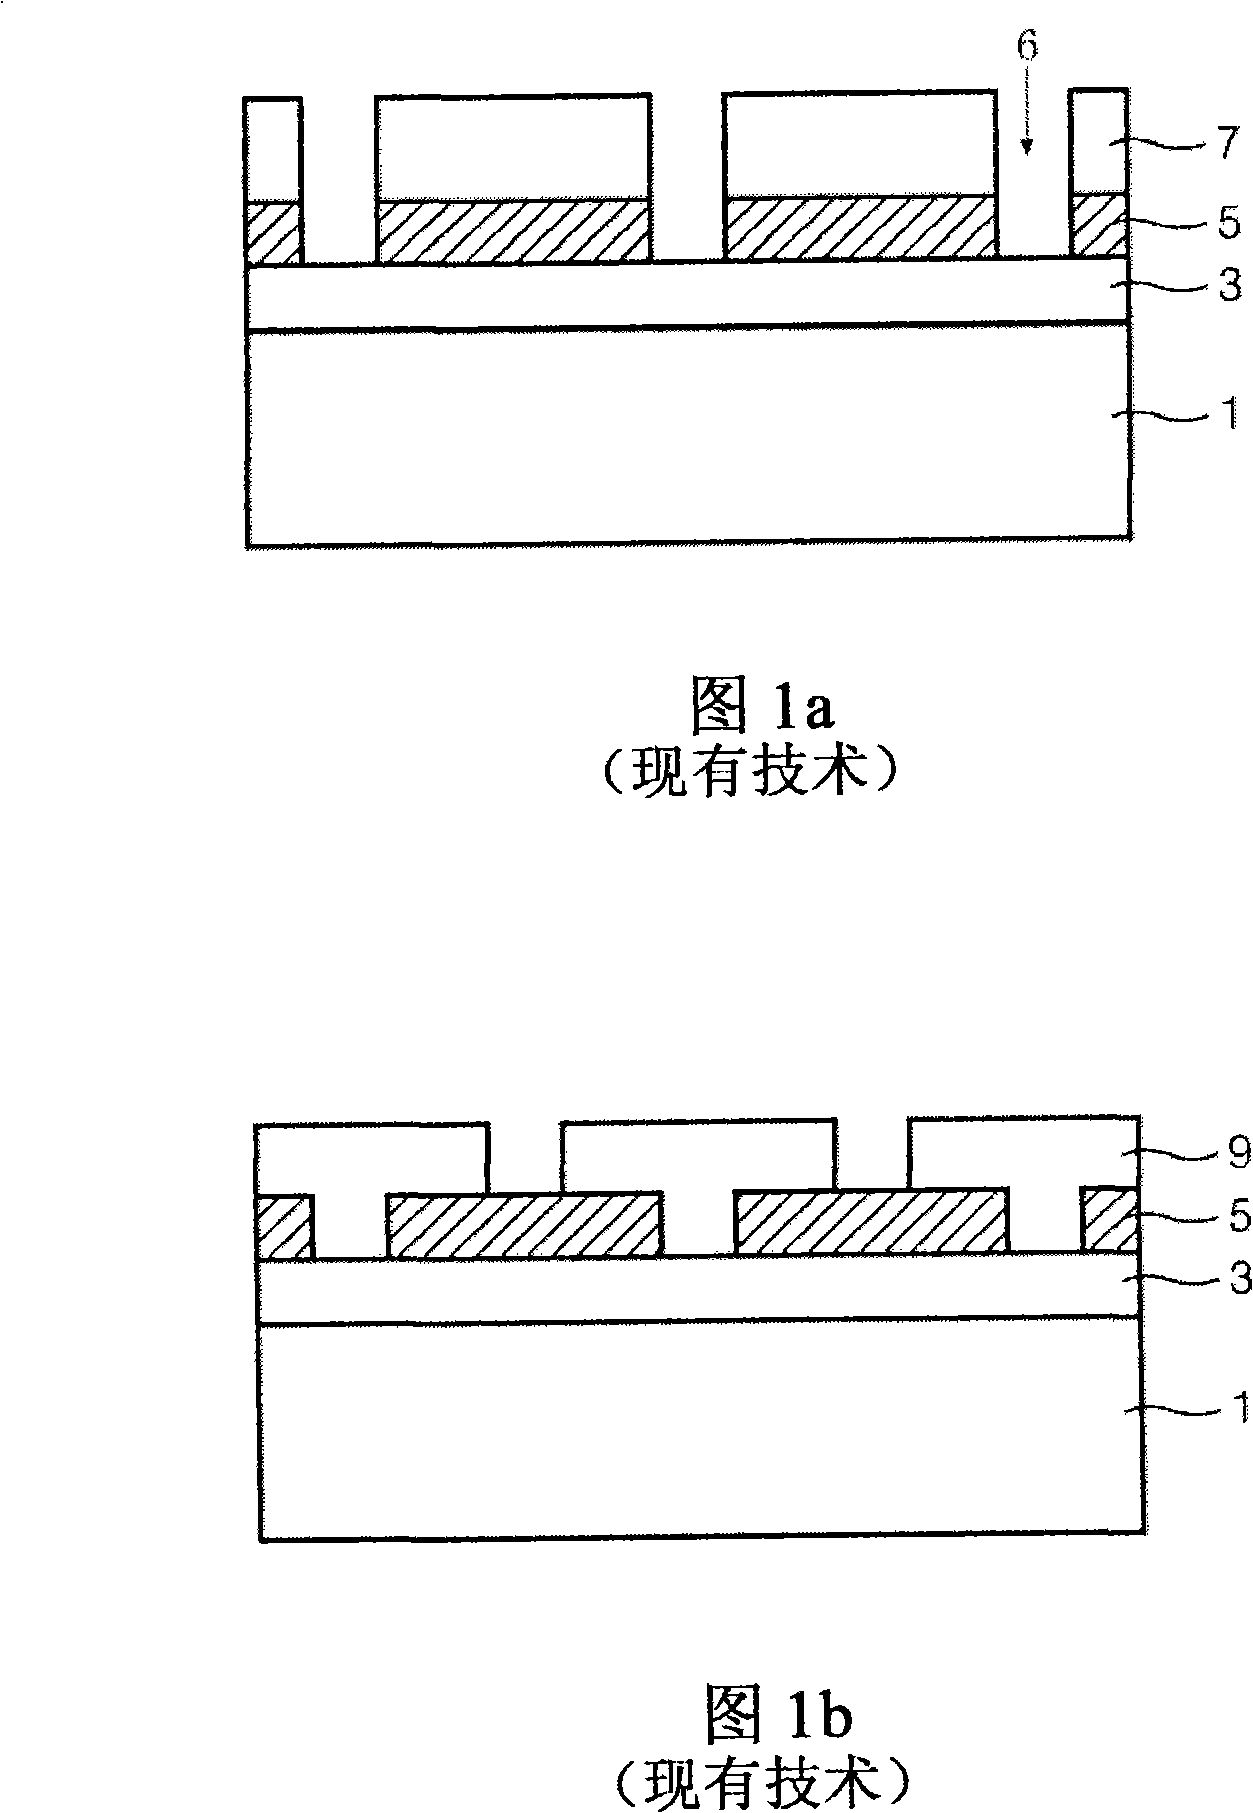 Method for forming fine pattern of semiconductor device